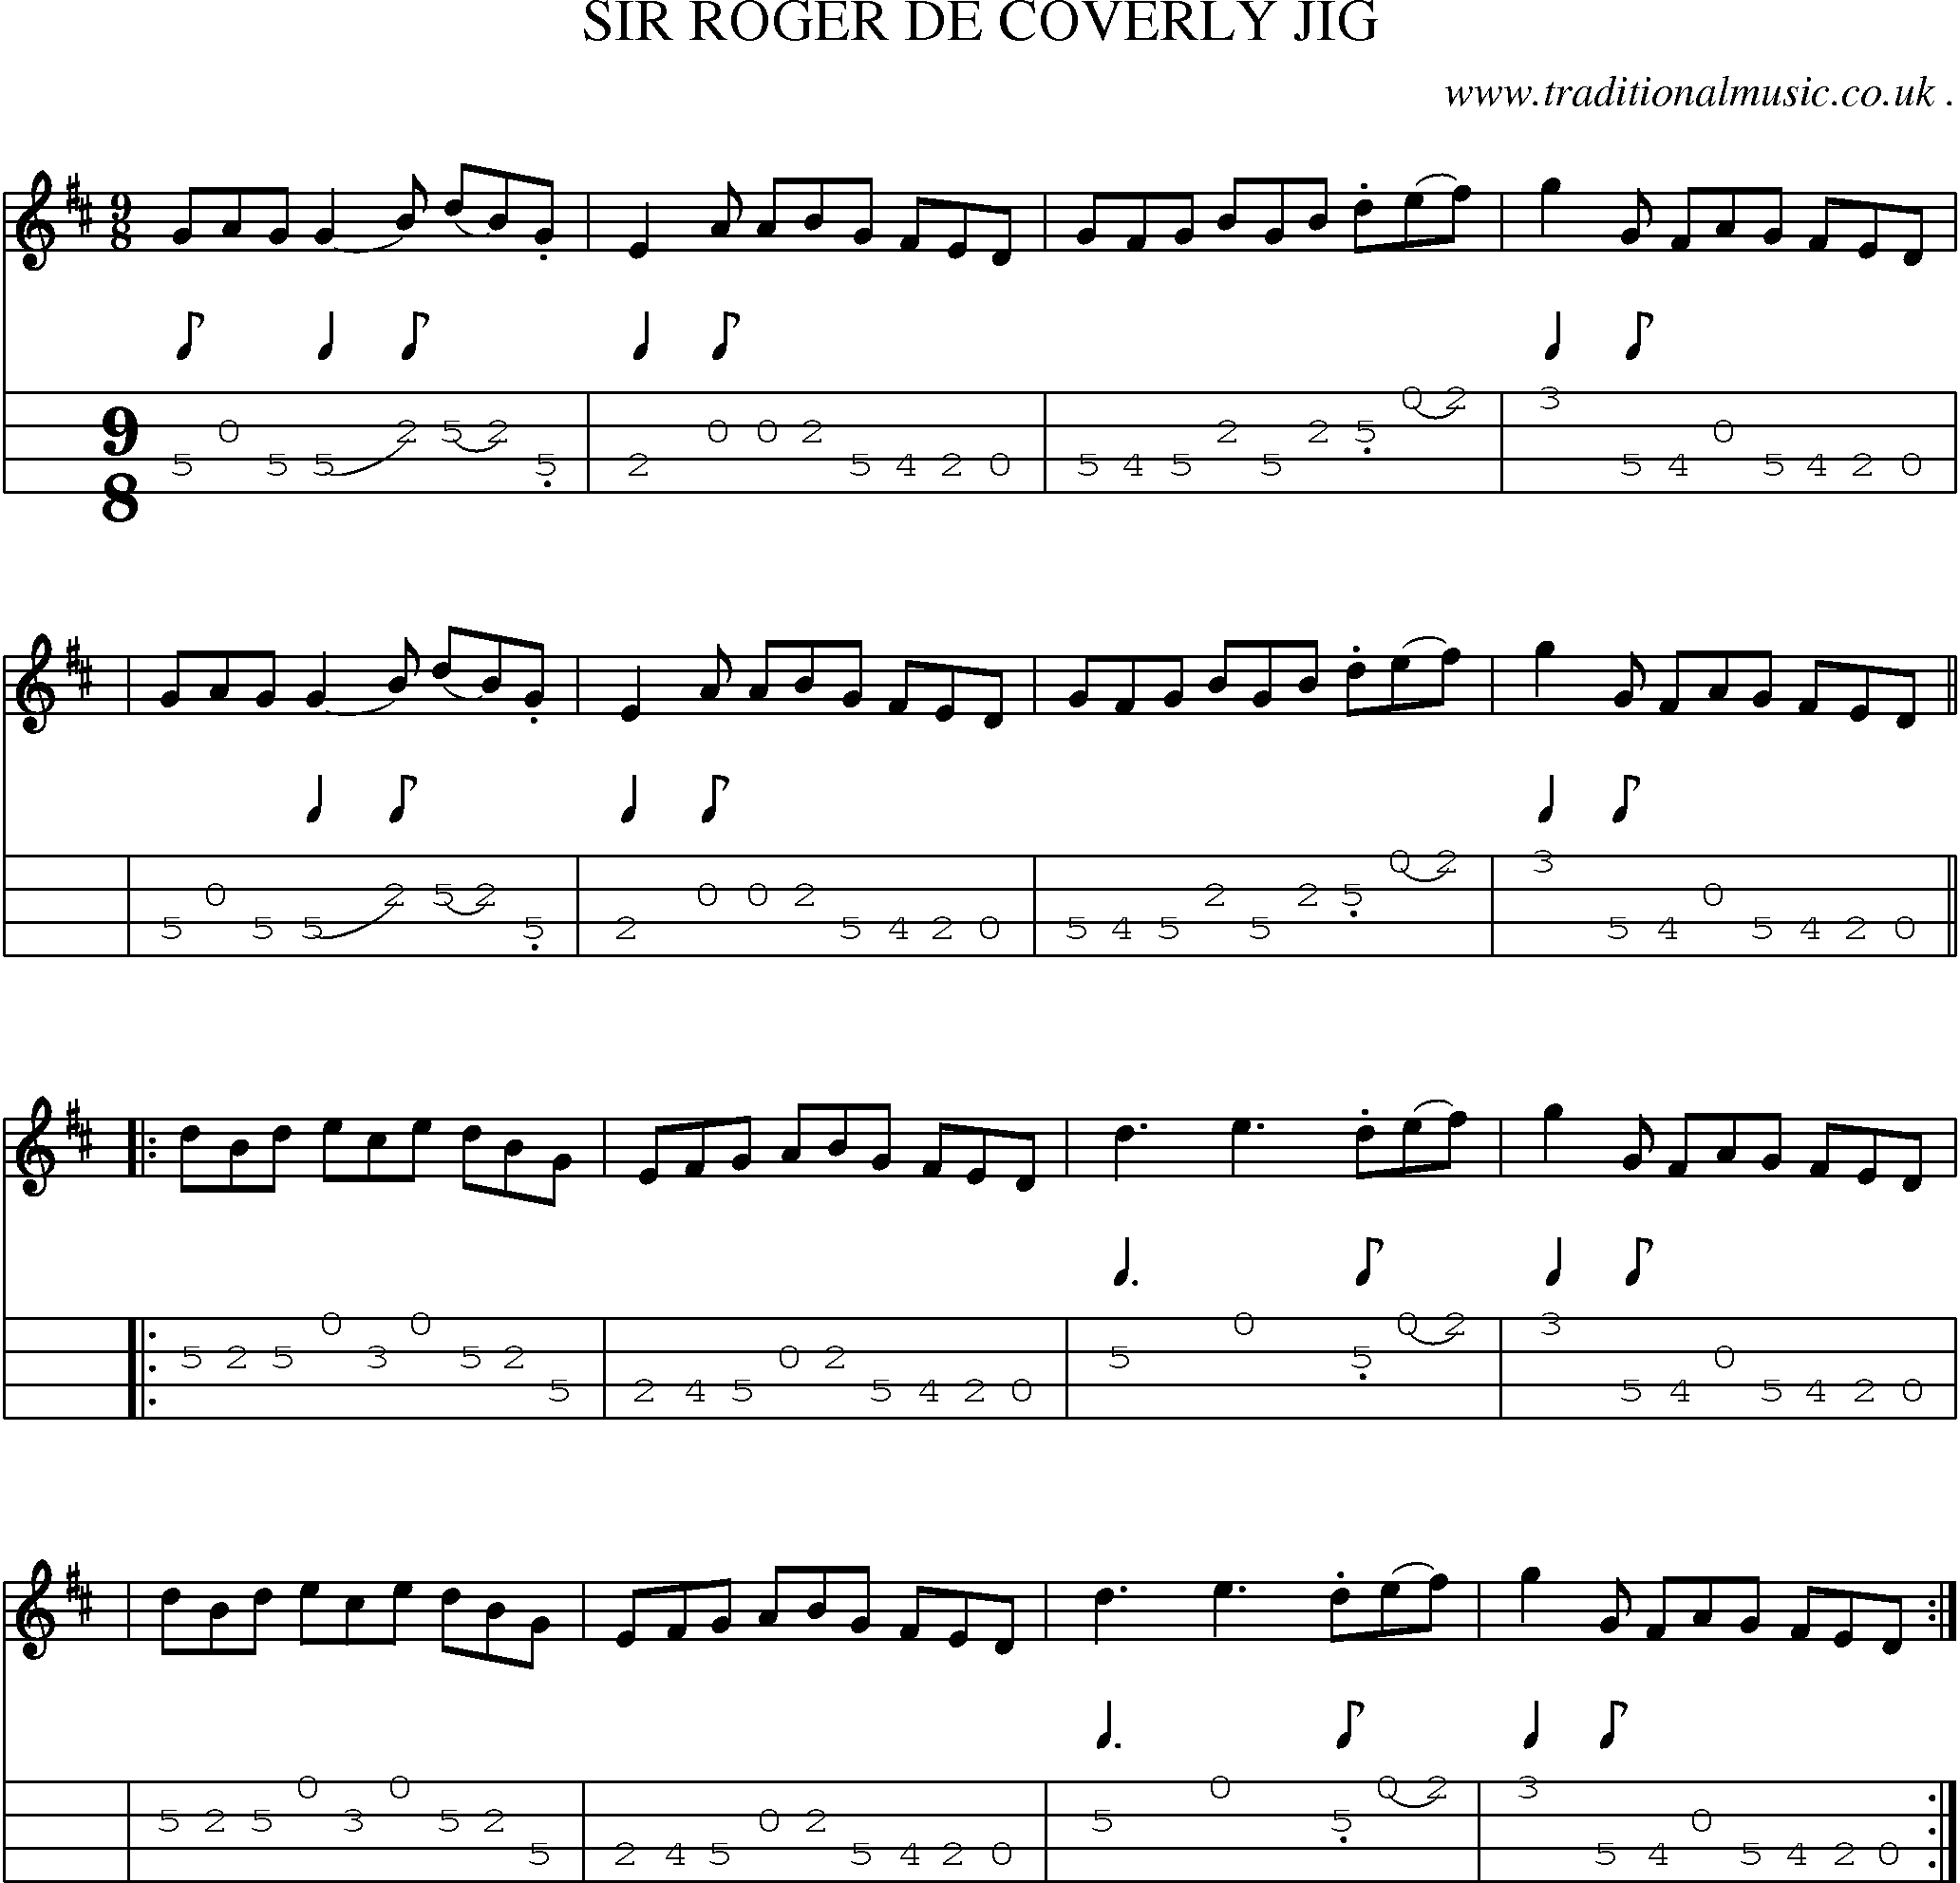 Sheet-Music and Mandolin Tabs for Sir Roger De Coverly Jig